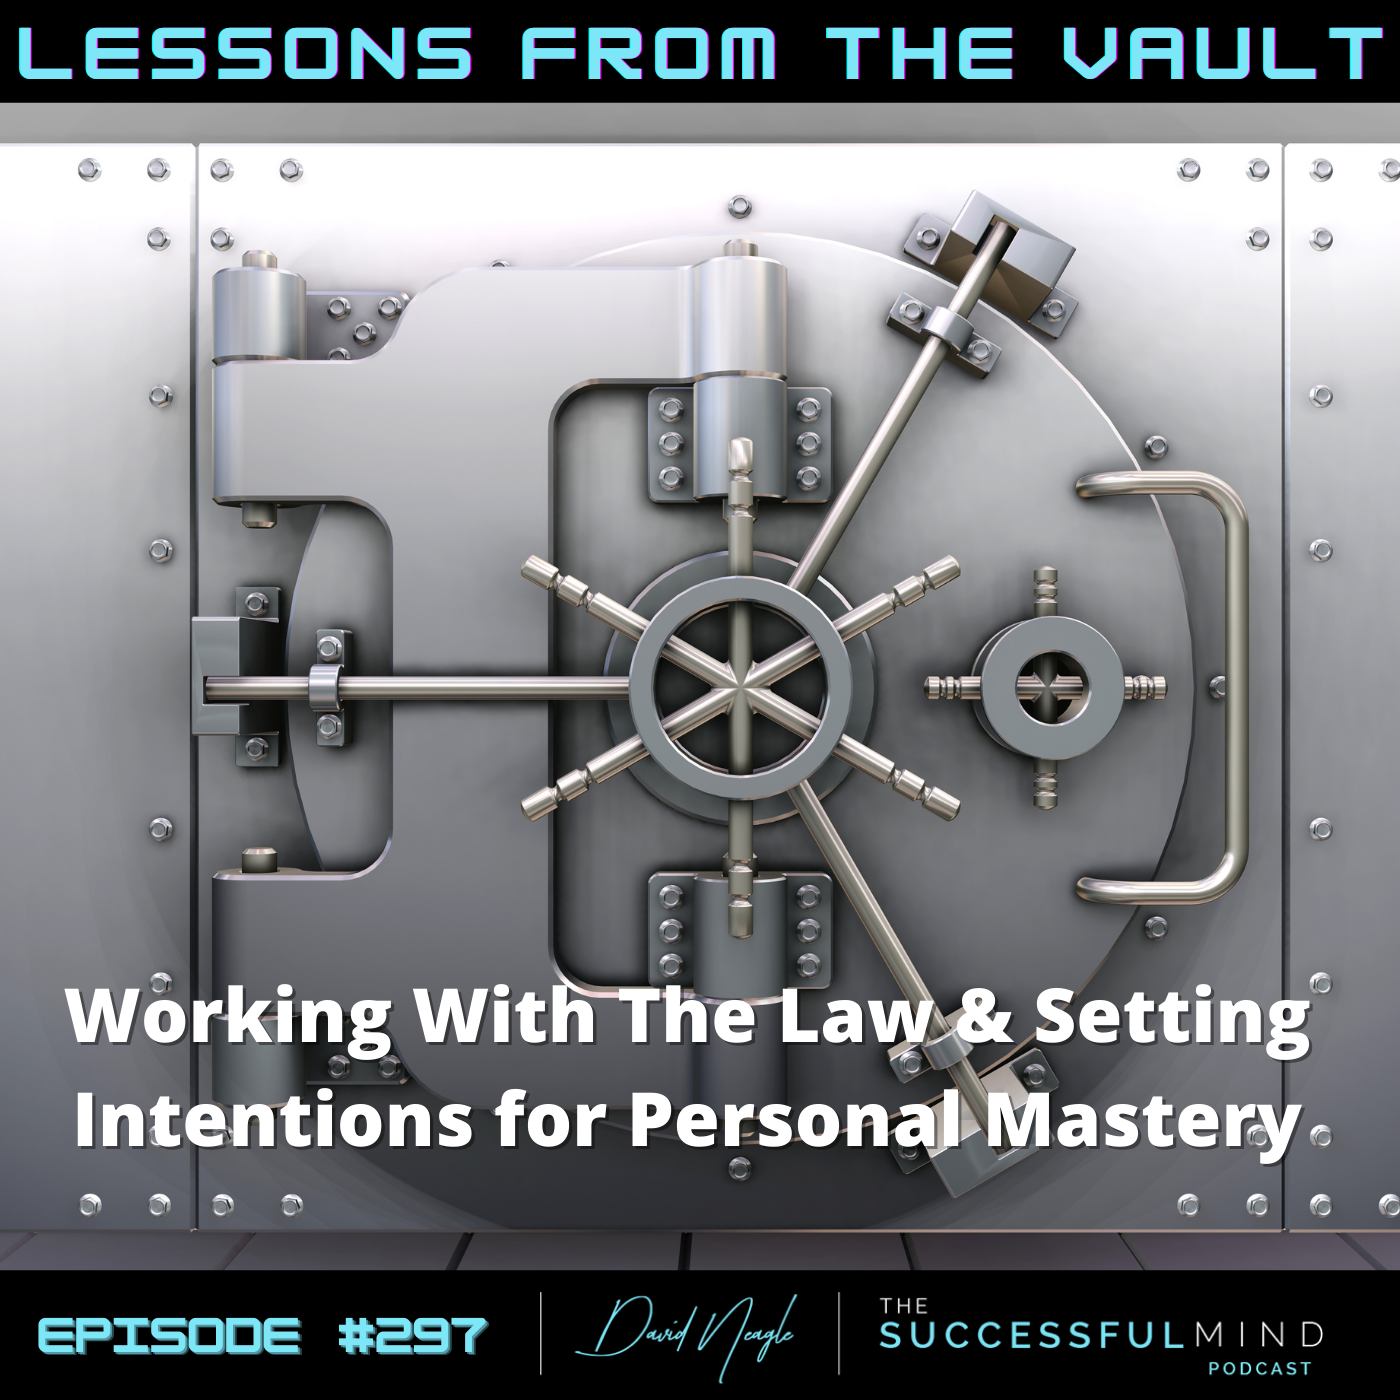 Episode 297: Working With the Law & Setting Intentions for Personal Mastery